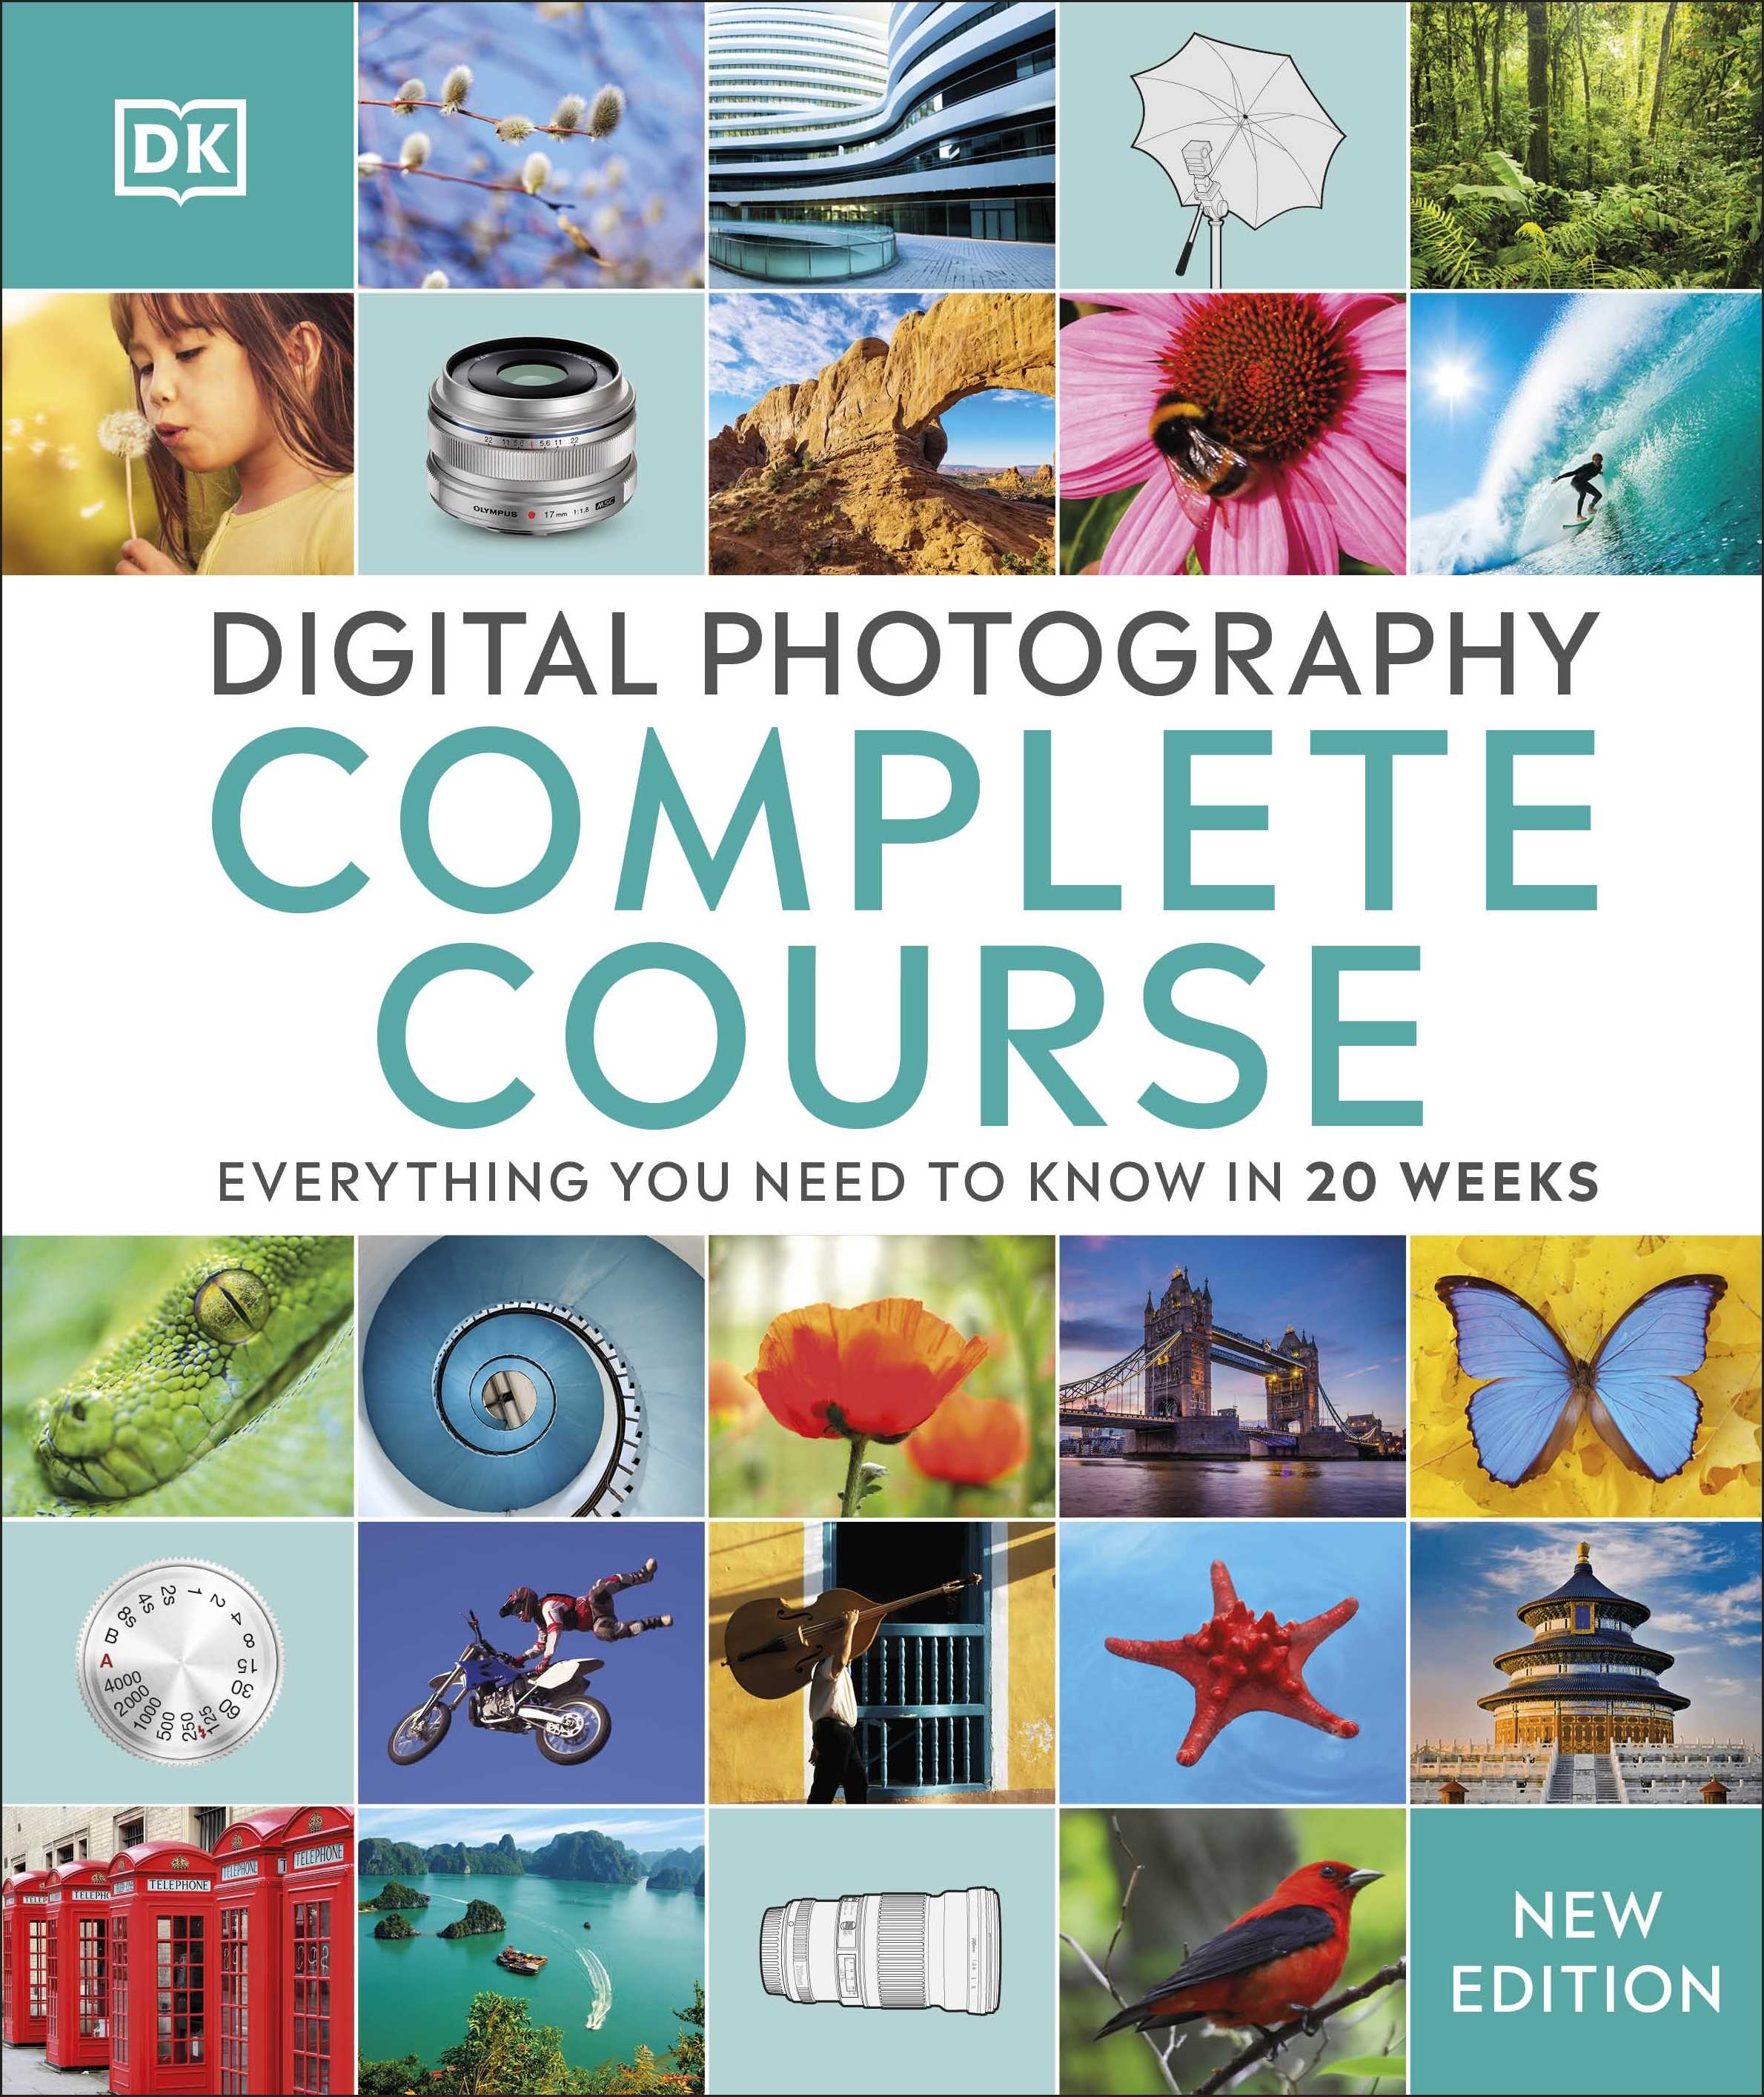 Digital Photography Complete Course (2nd Edition)